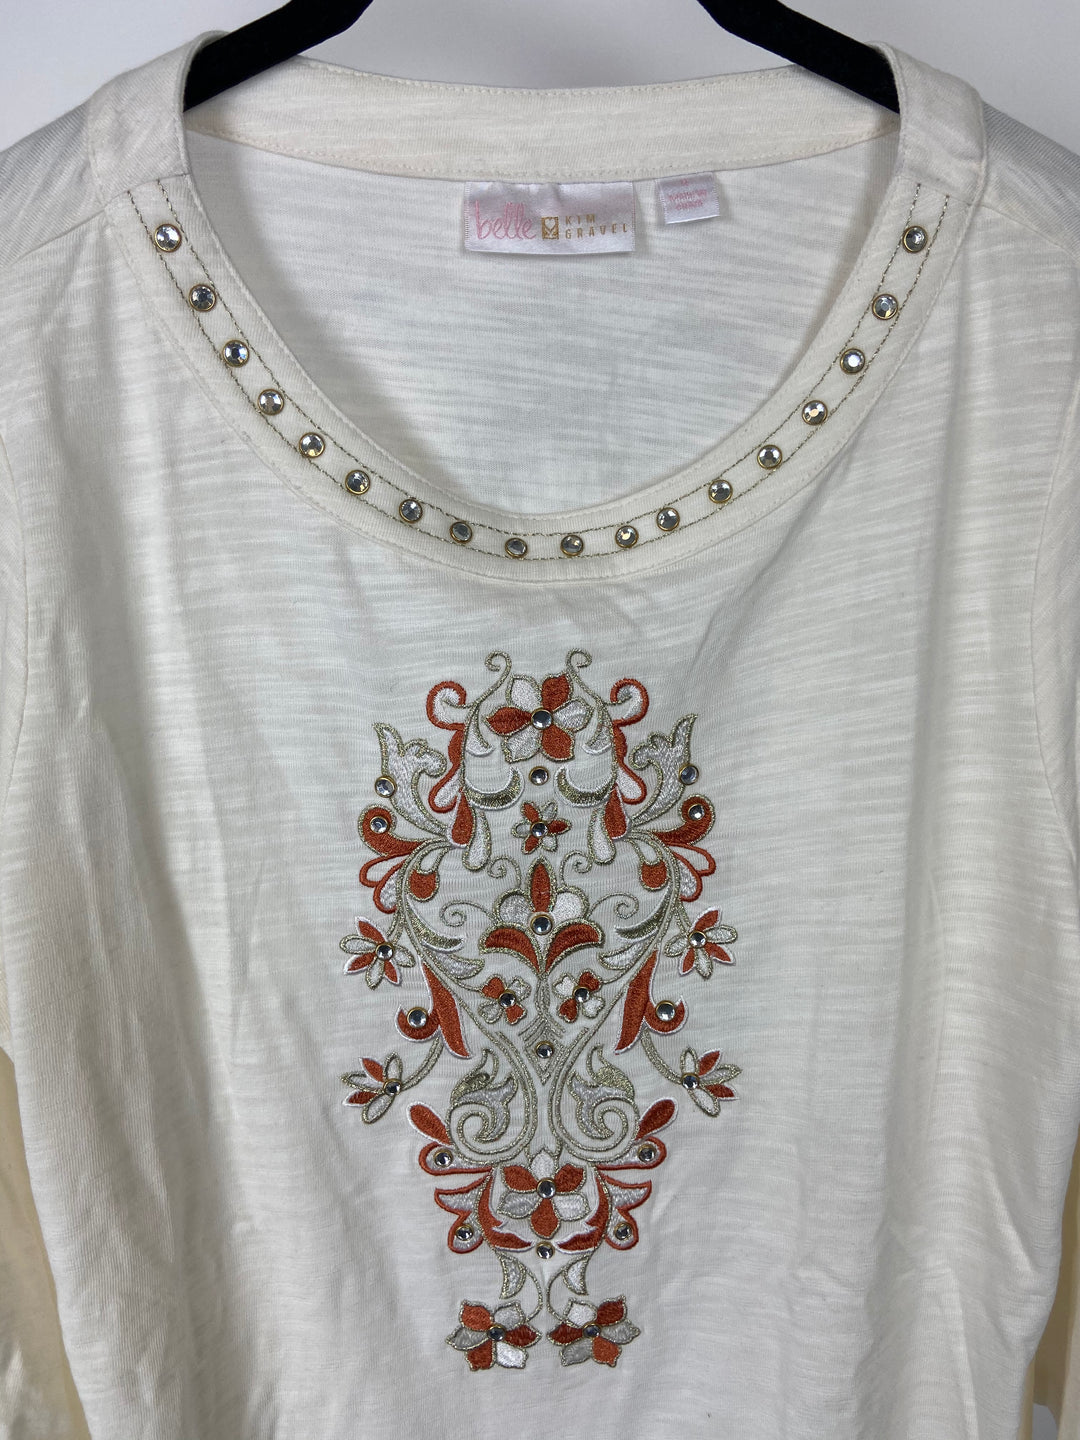 White Top With Burnt Orange Floral Embroidery - Small/Medium